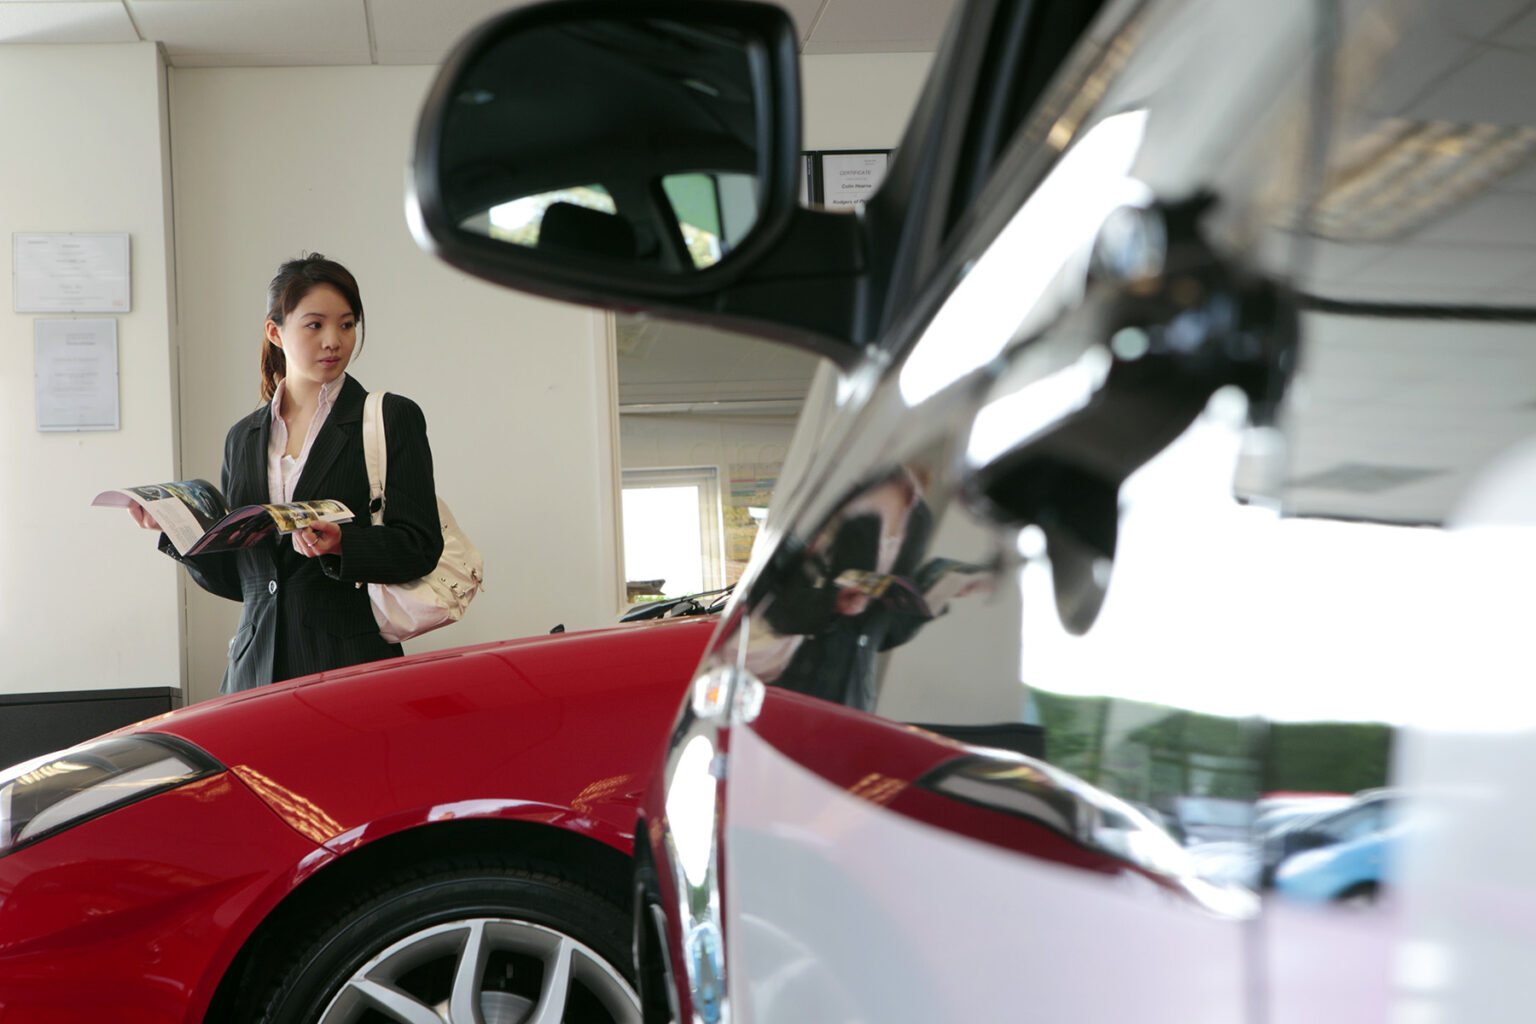 Woman browsing a catalogue as she is looking at a red car inside a dealers showroom.